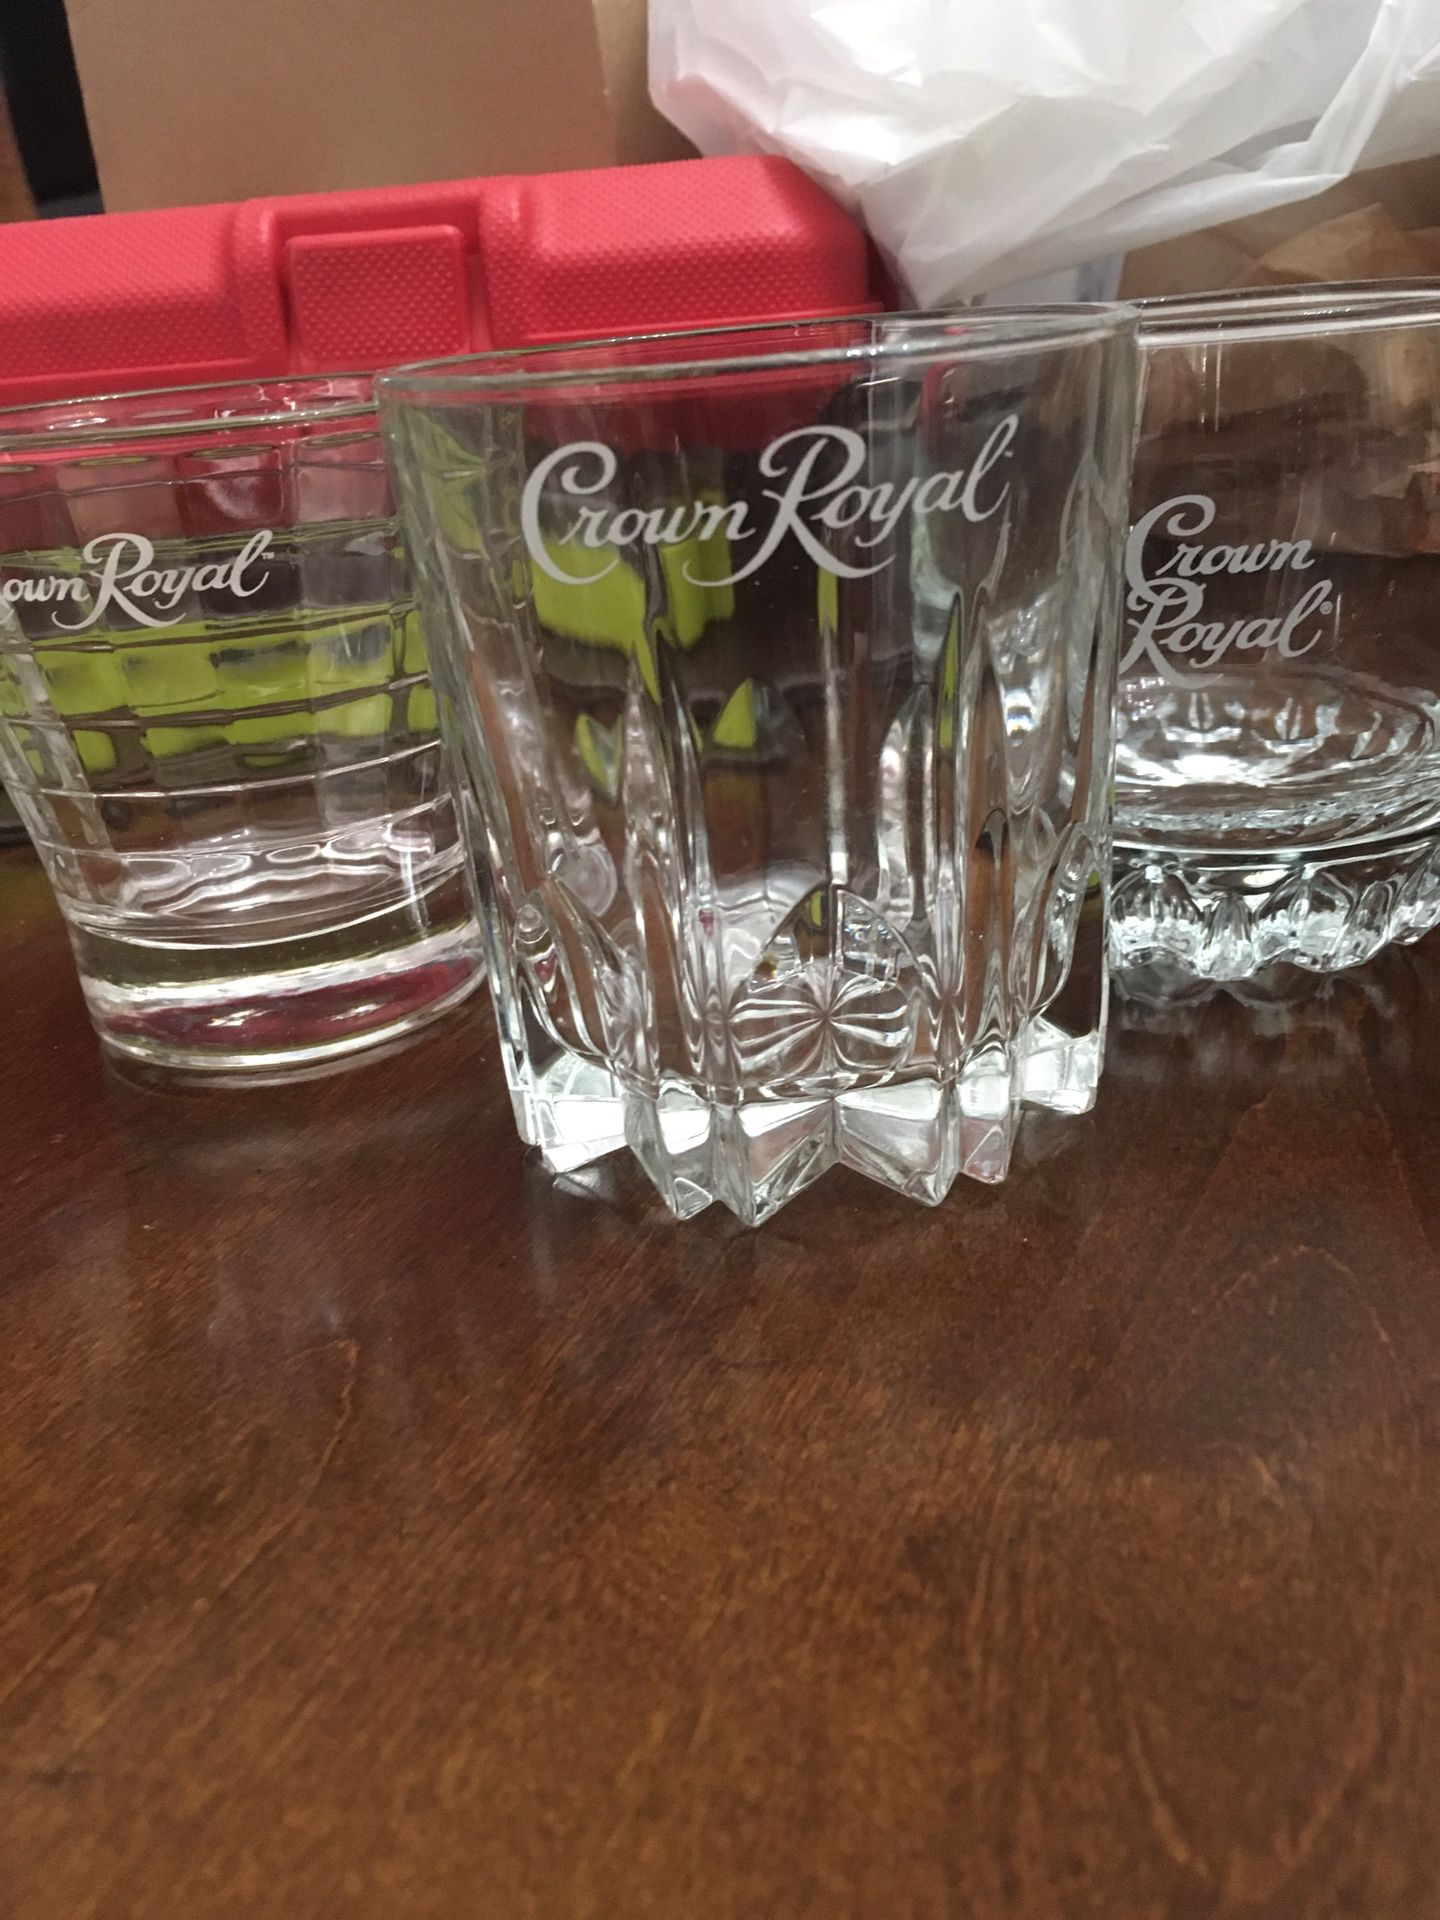 Crown royal glass collection